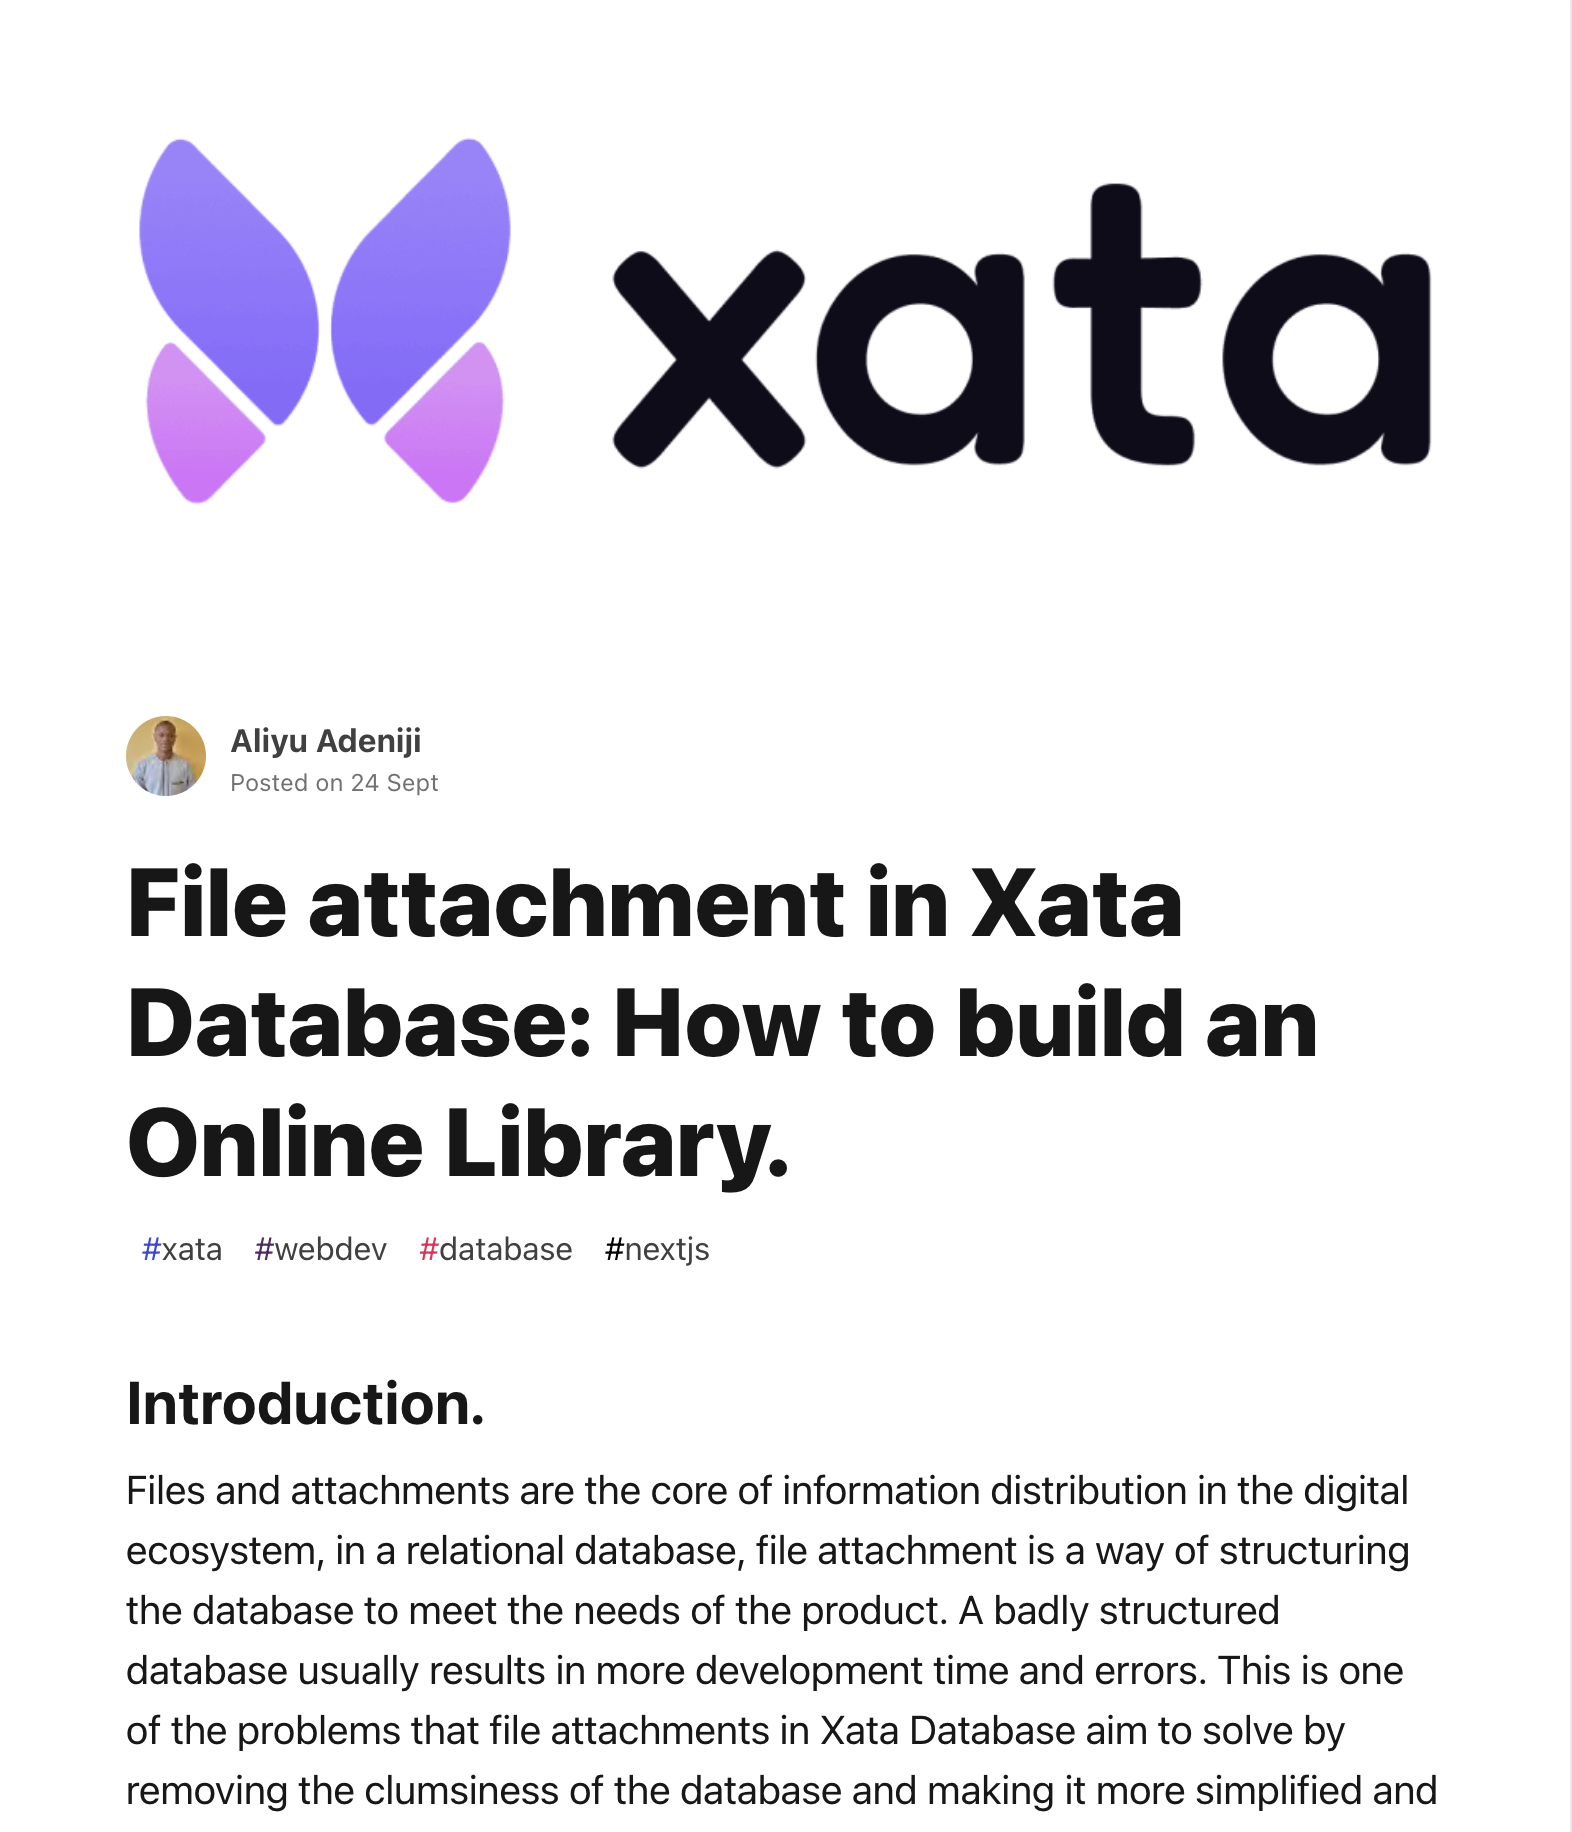 Online library with Xata